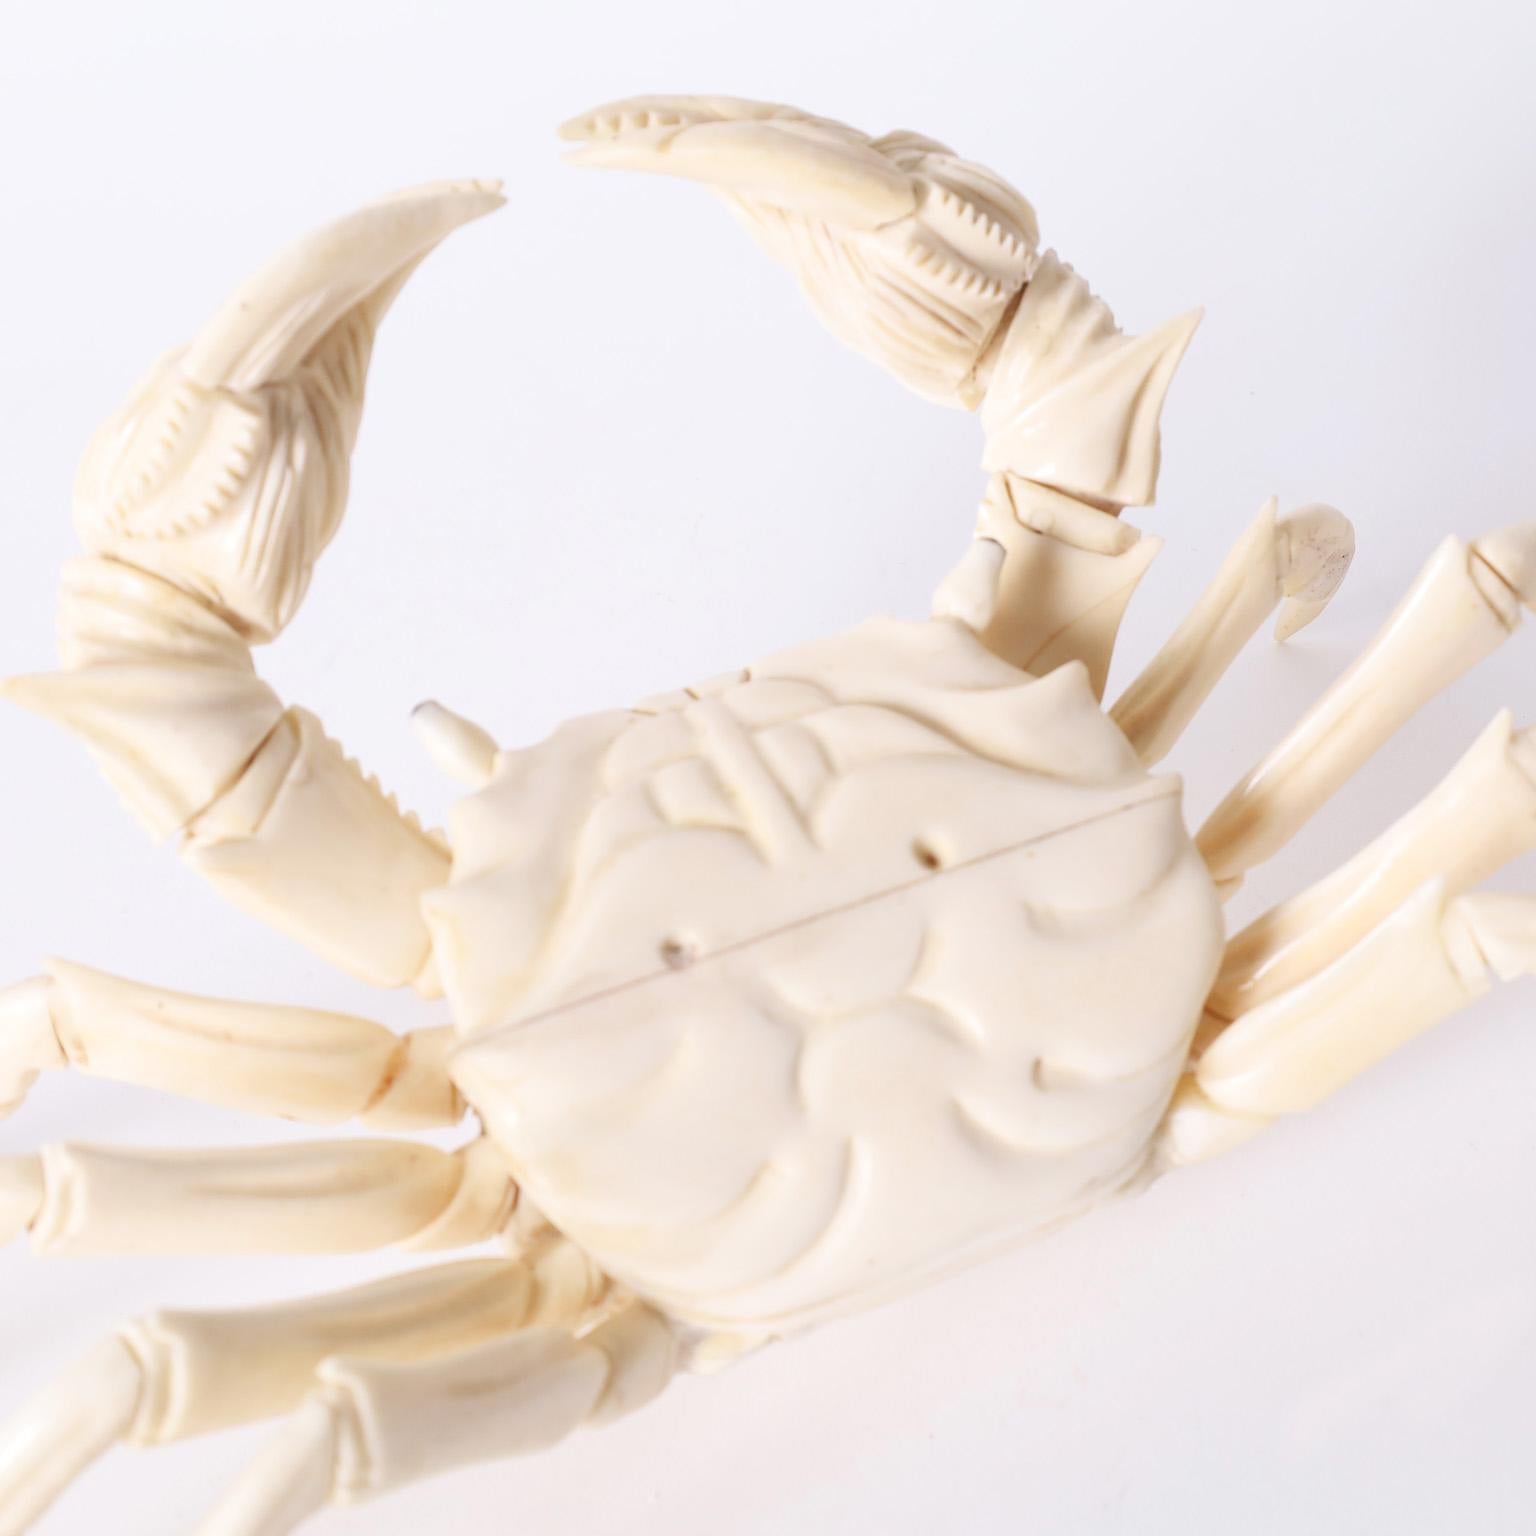 Remarkable crab sculpture crafted in carved bone with surprising accuracy and lots of moving parts.